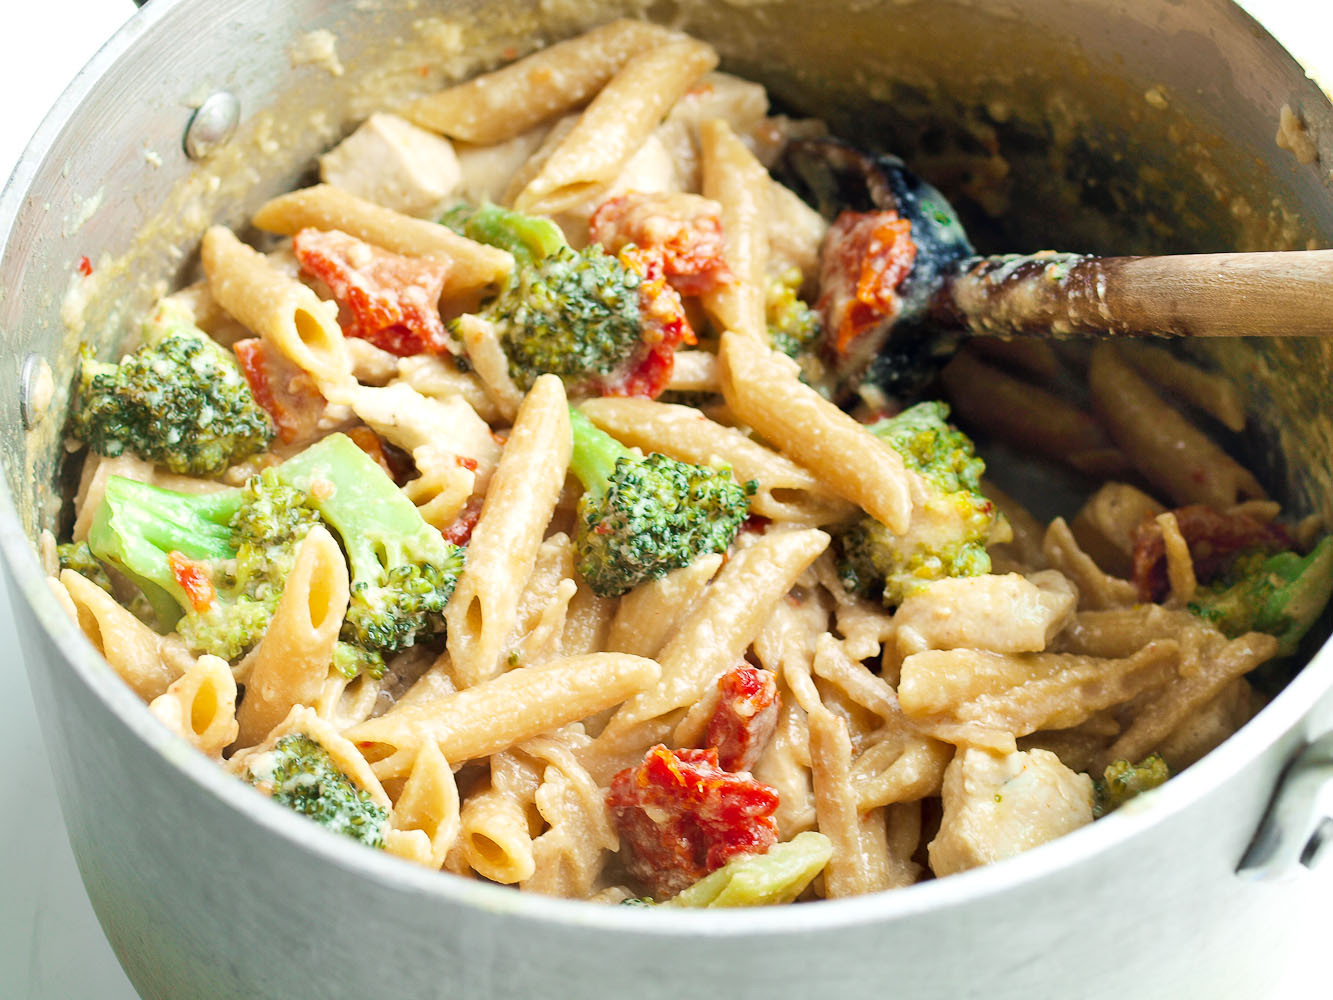 Healthy Dinner Recipes For Kids
 Tangy e Pot Chicken and Veggie Pasta Dinner